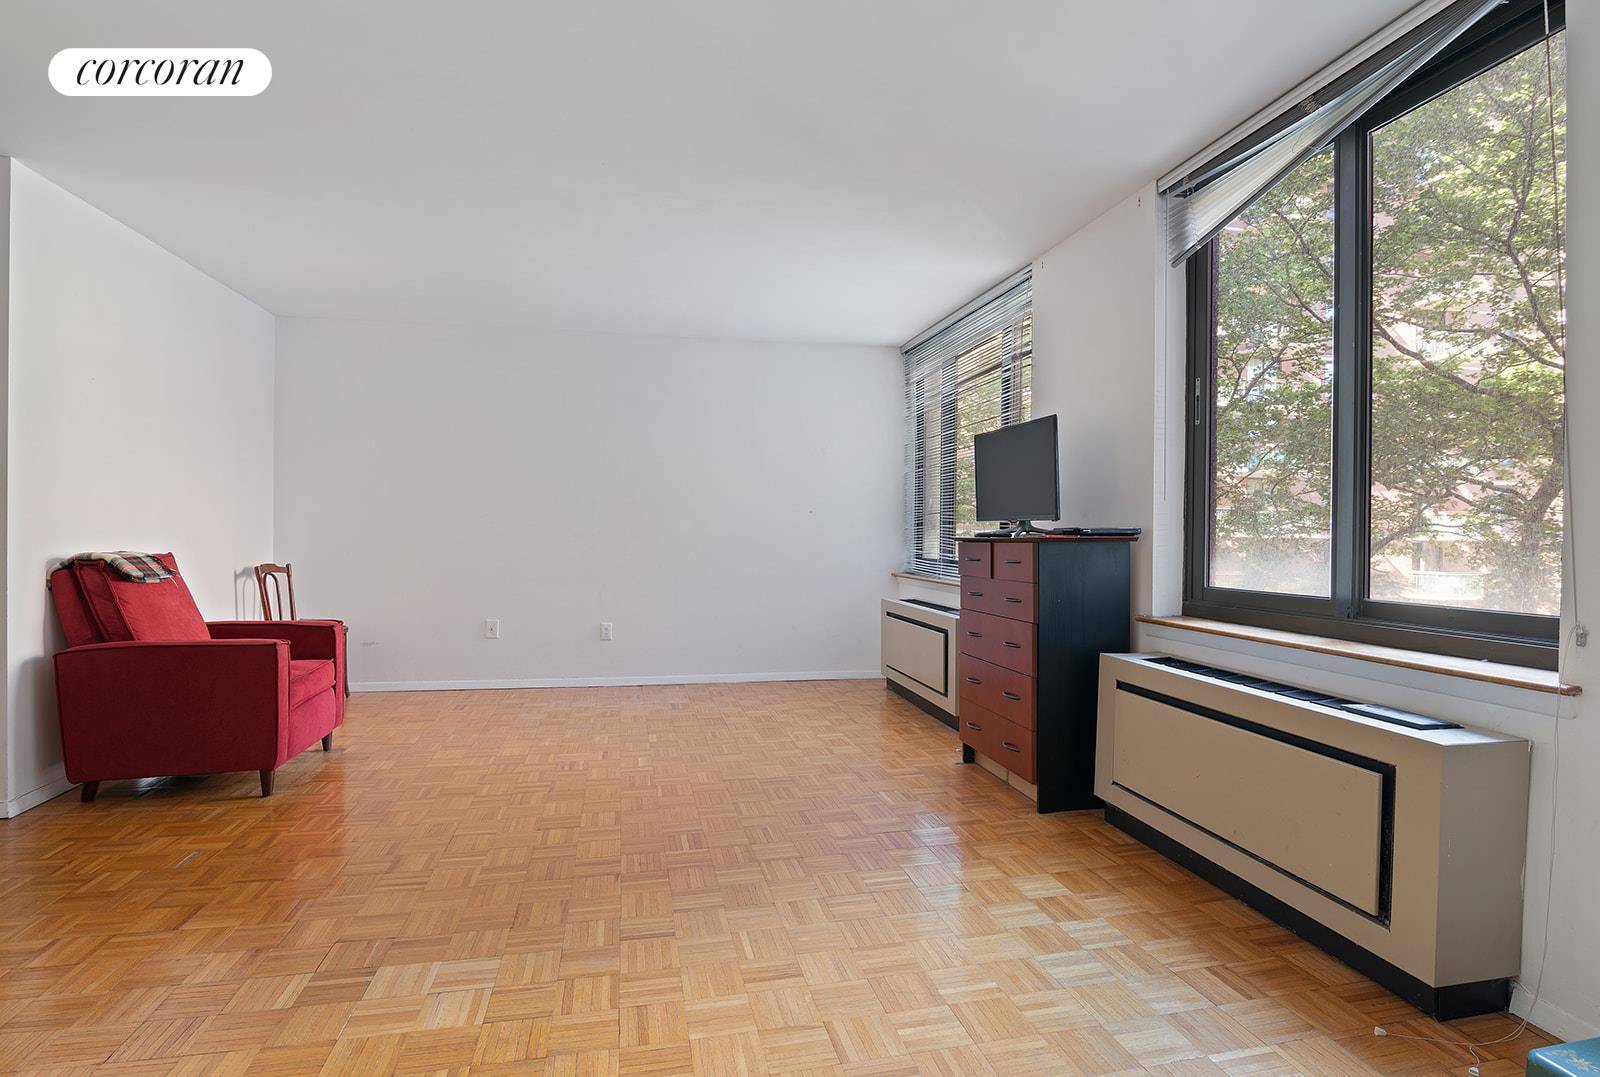 NEW PRICE 475, 000 A Rare Alcove Studio in Prime Battery Park City is back on the market.